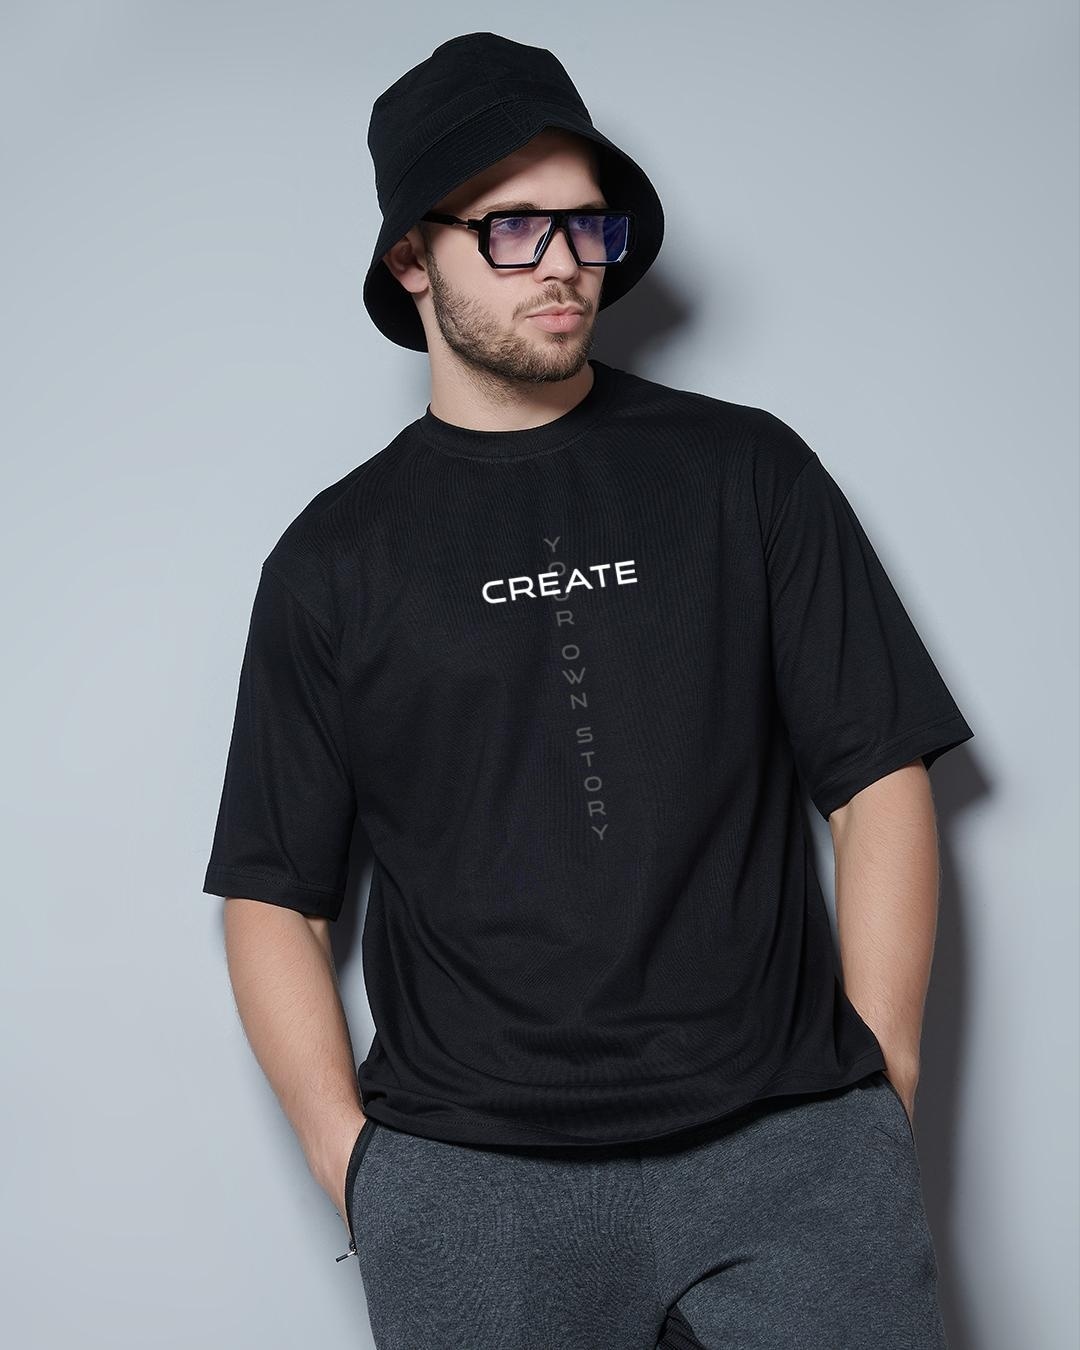 Buy Men's Black Real Life Graphic Printed Oversized T-shirt Online